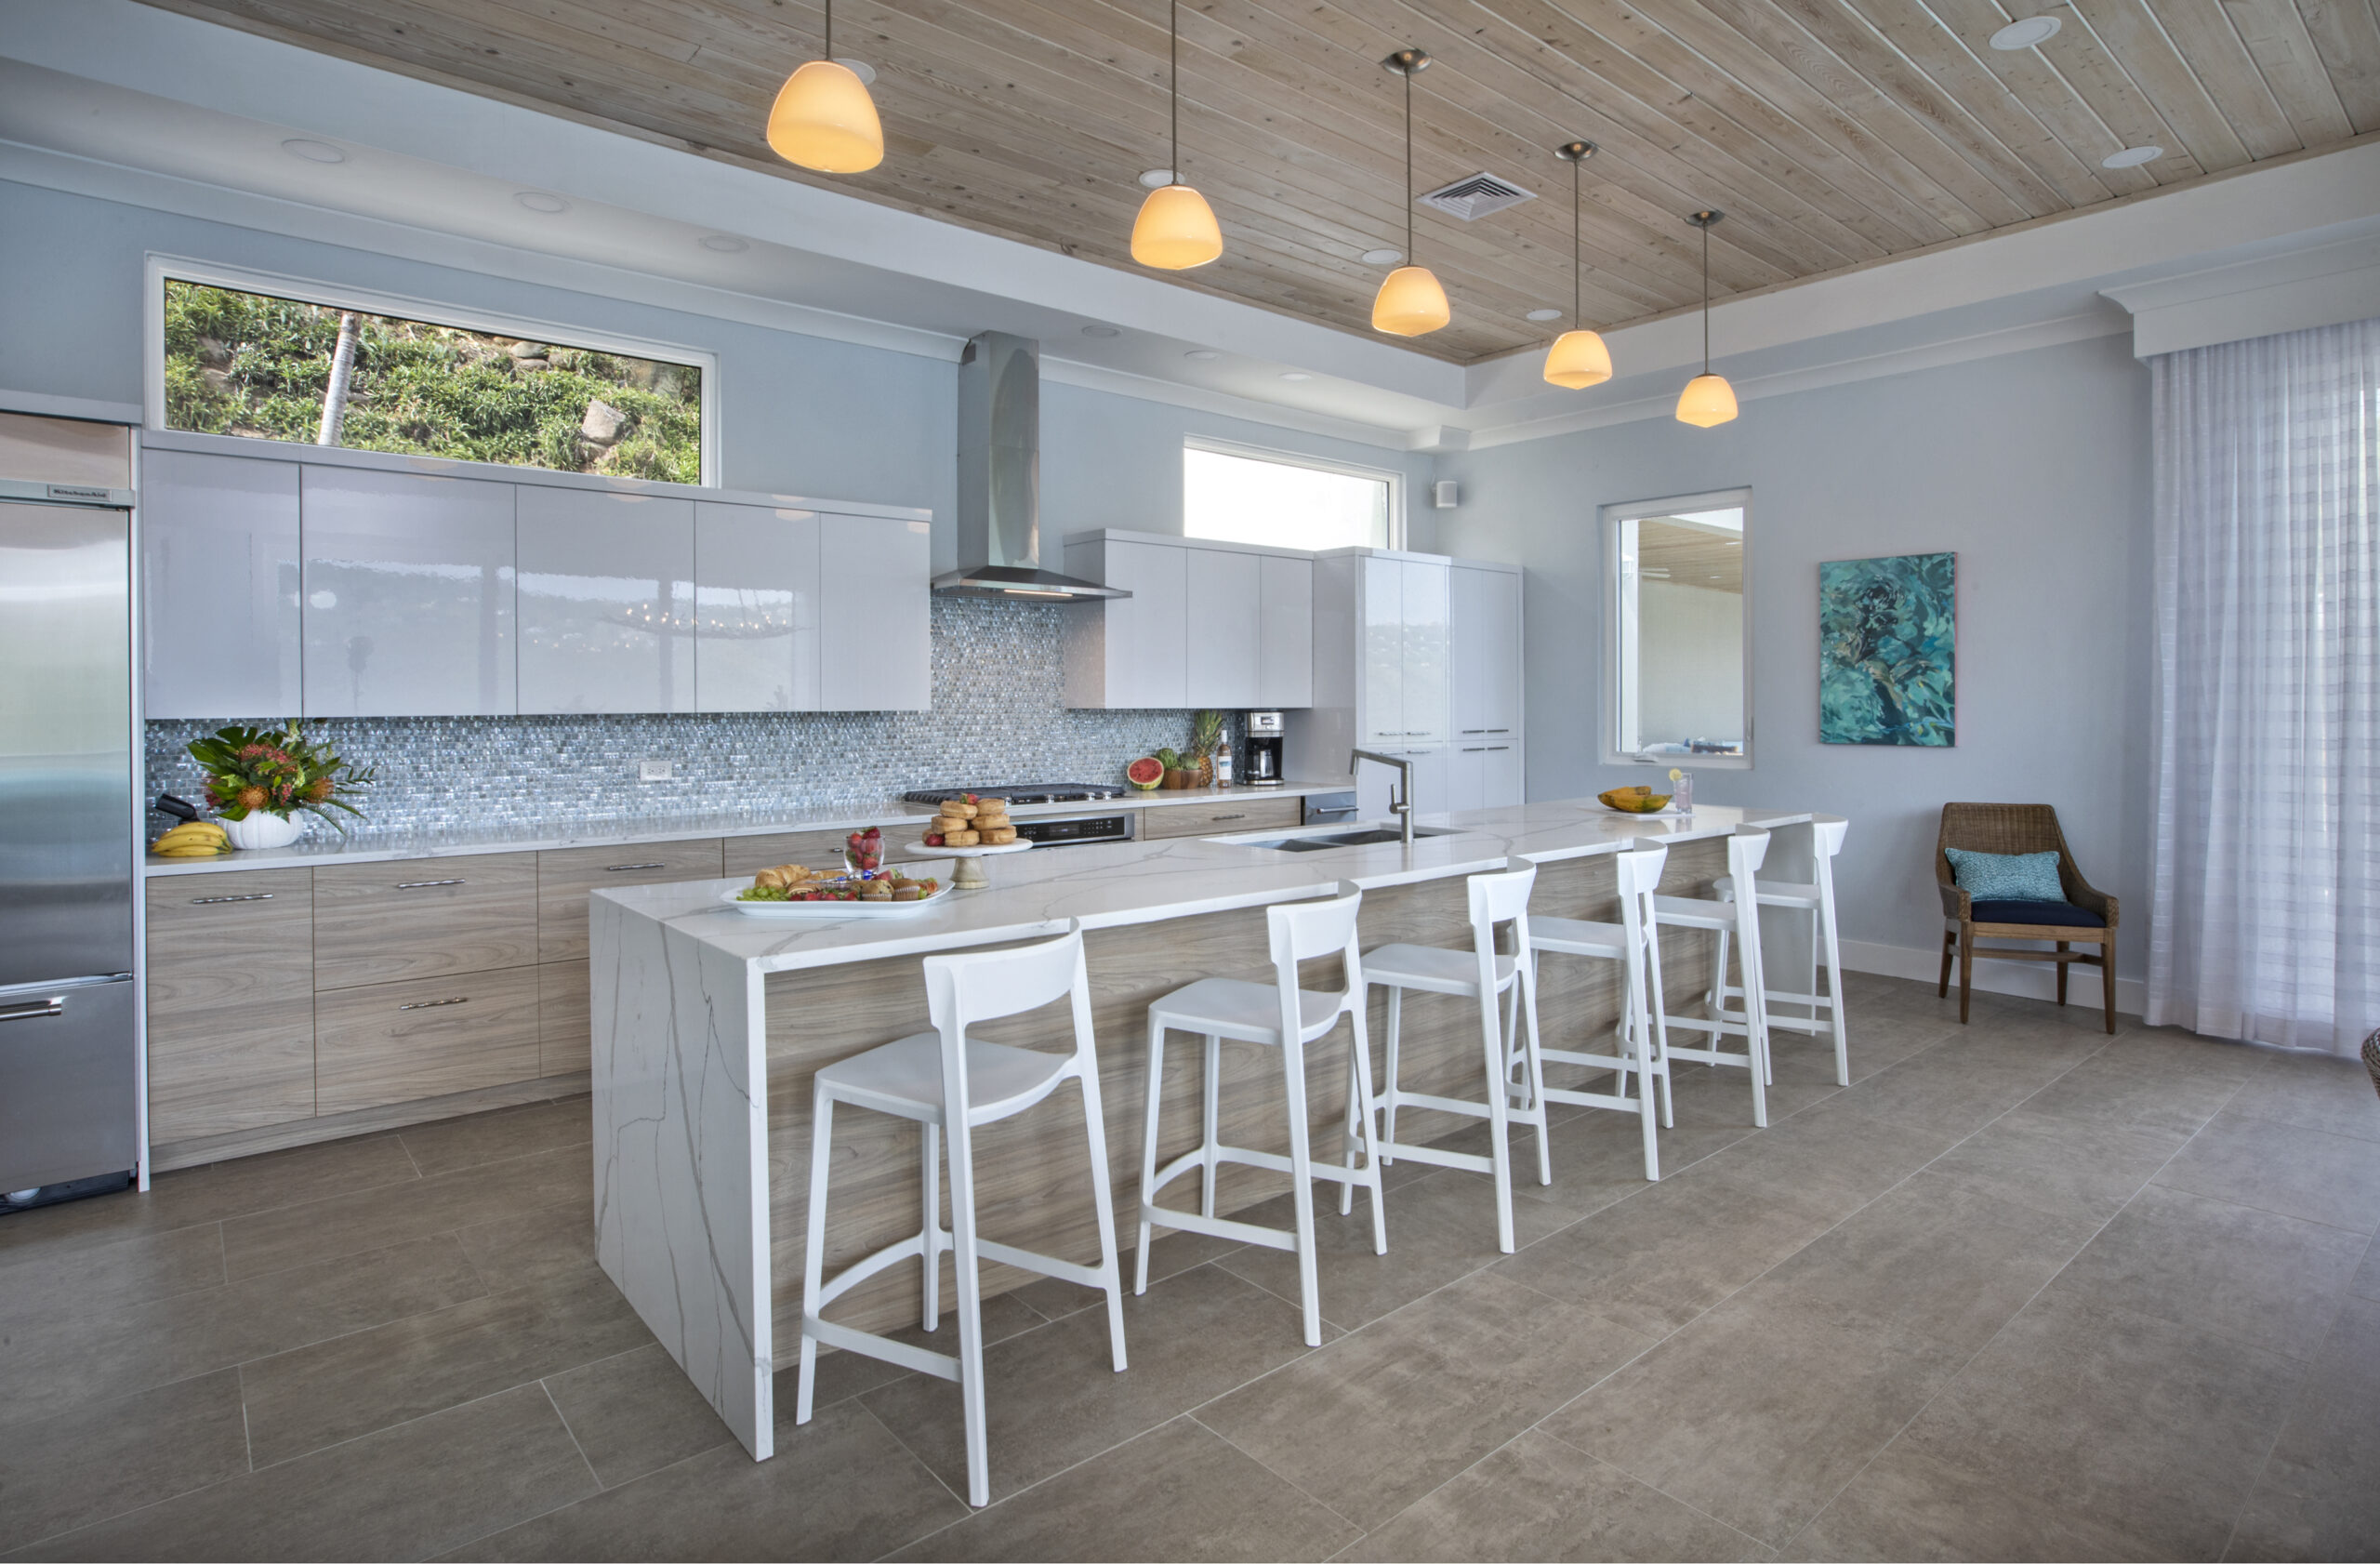 Light and Bright Kitchen Design with Overhead Lighting and Stools for Entertaining